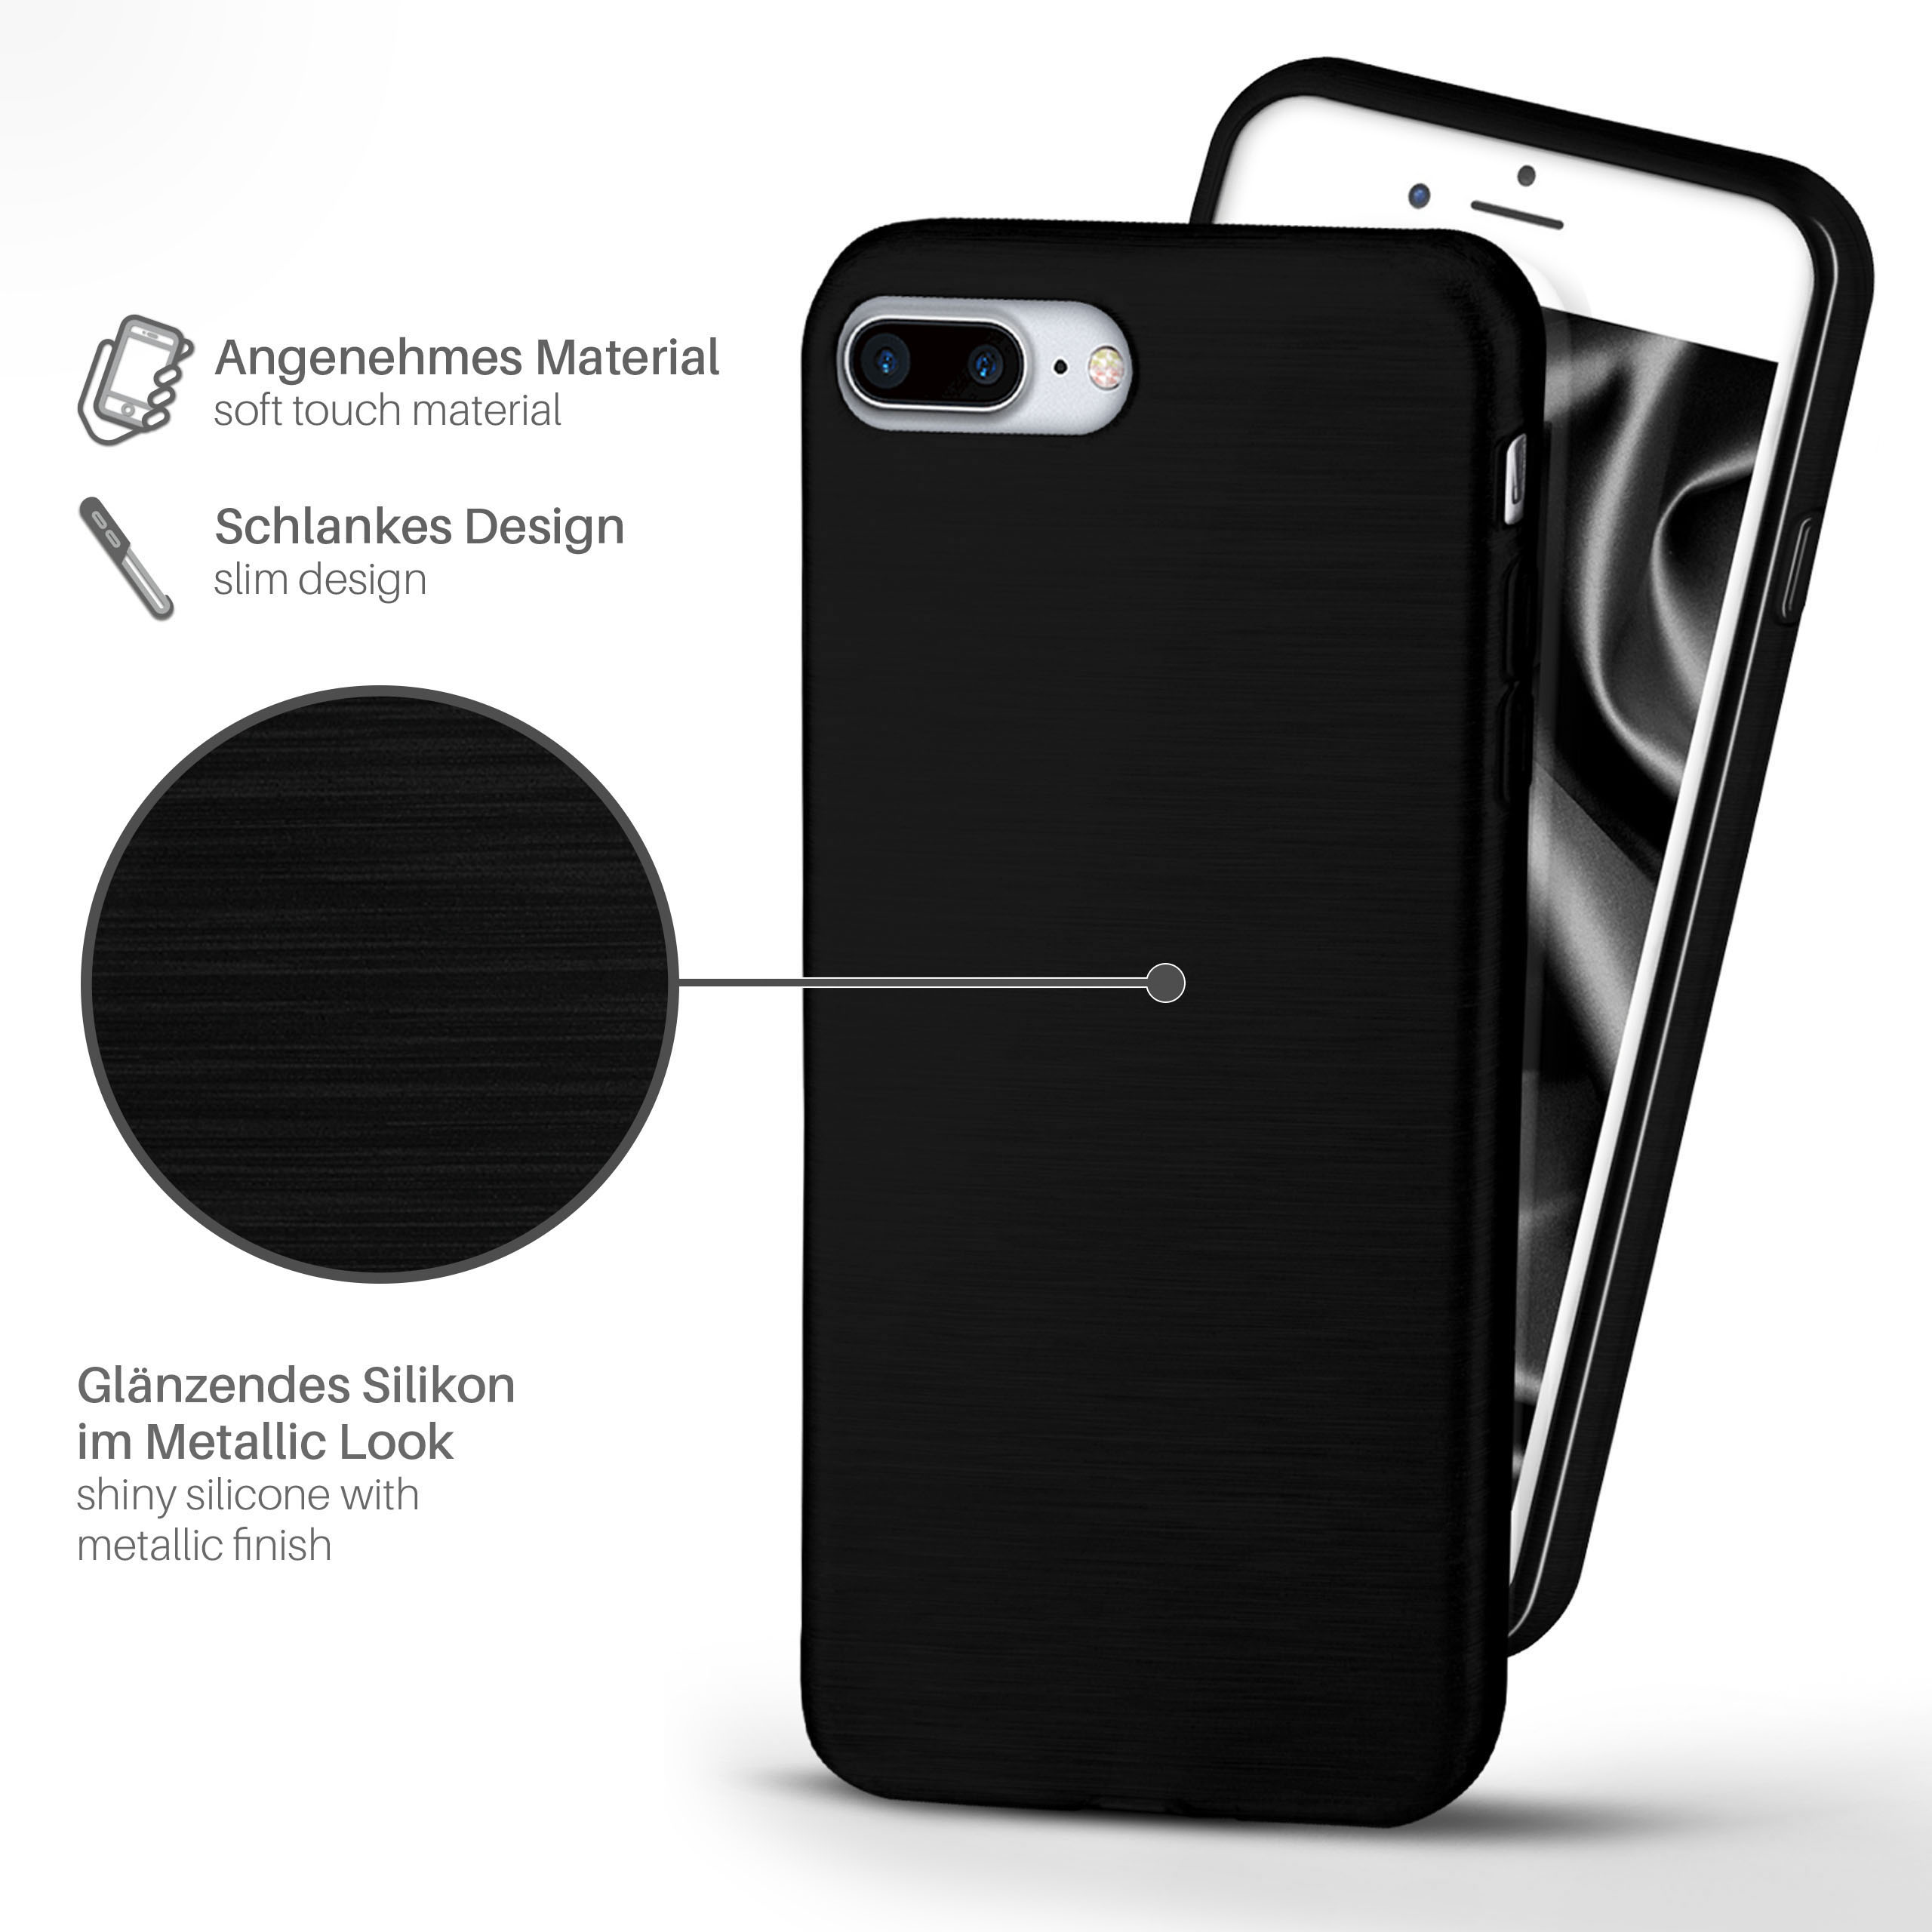 Onyx-Black Backcover, MOEX / Case, iPhone Apple, 7 Plus 8 iPhone Plus, Brushed